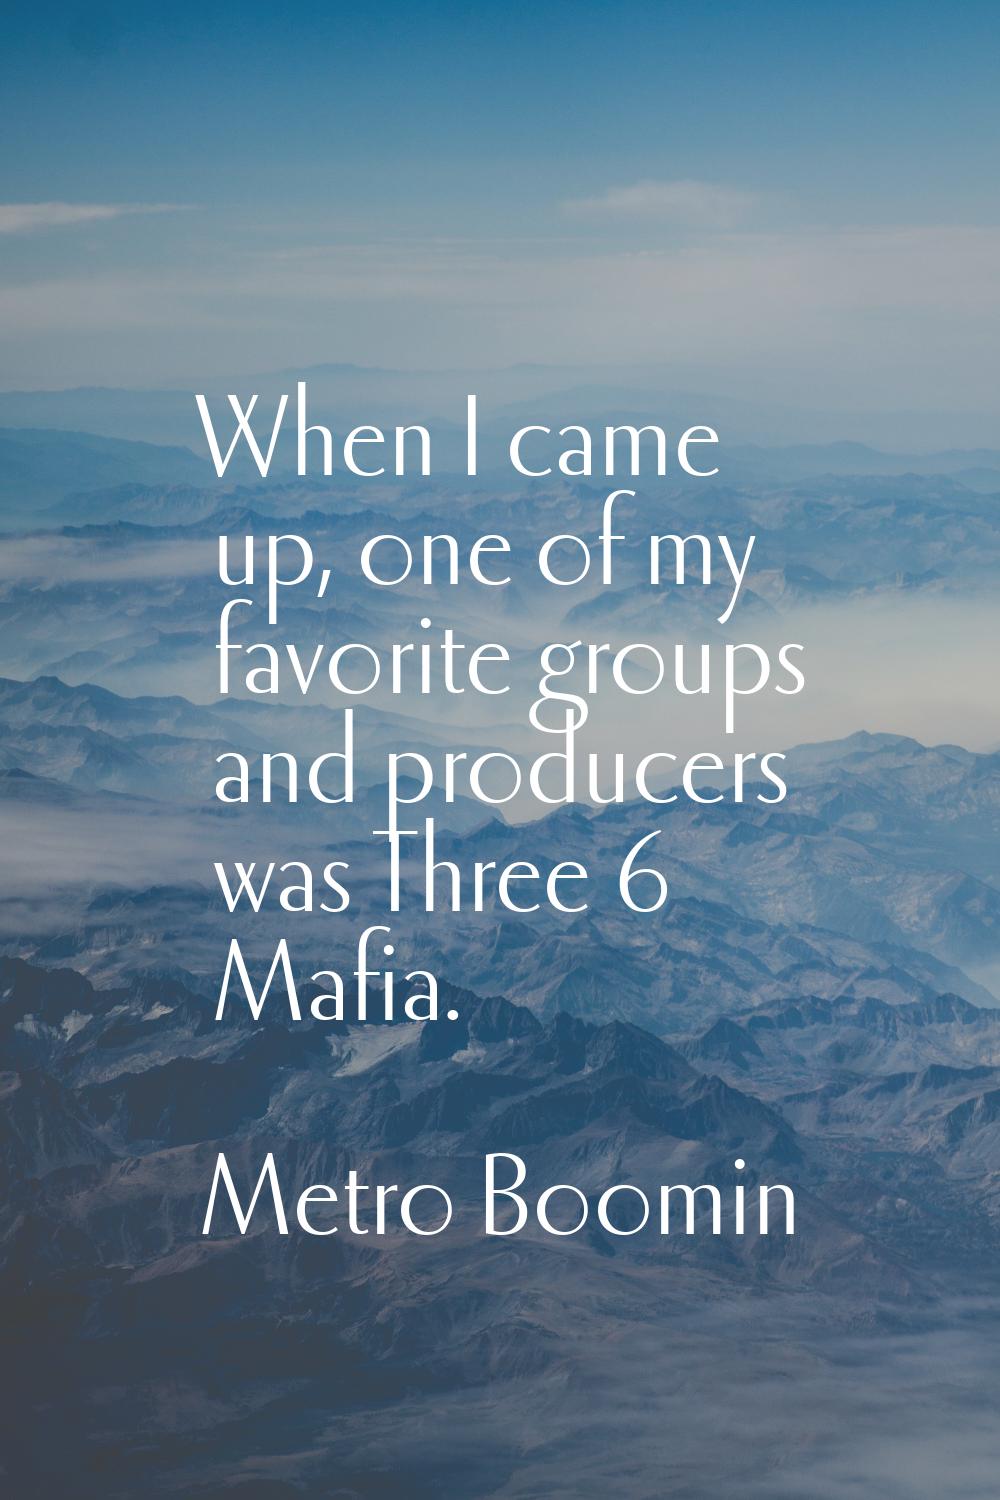 When I came up, one of my favorite groups and producers was Three 6 Mafia.